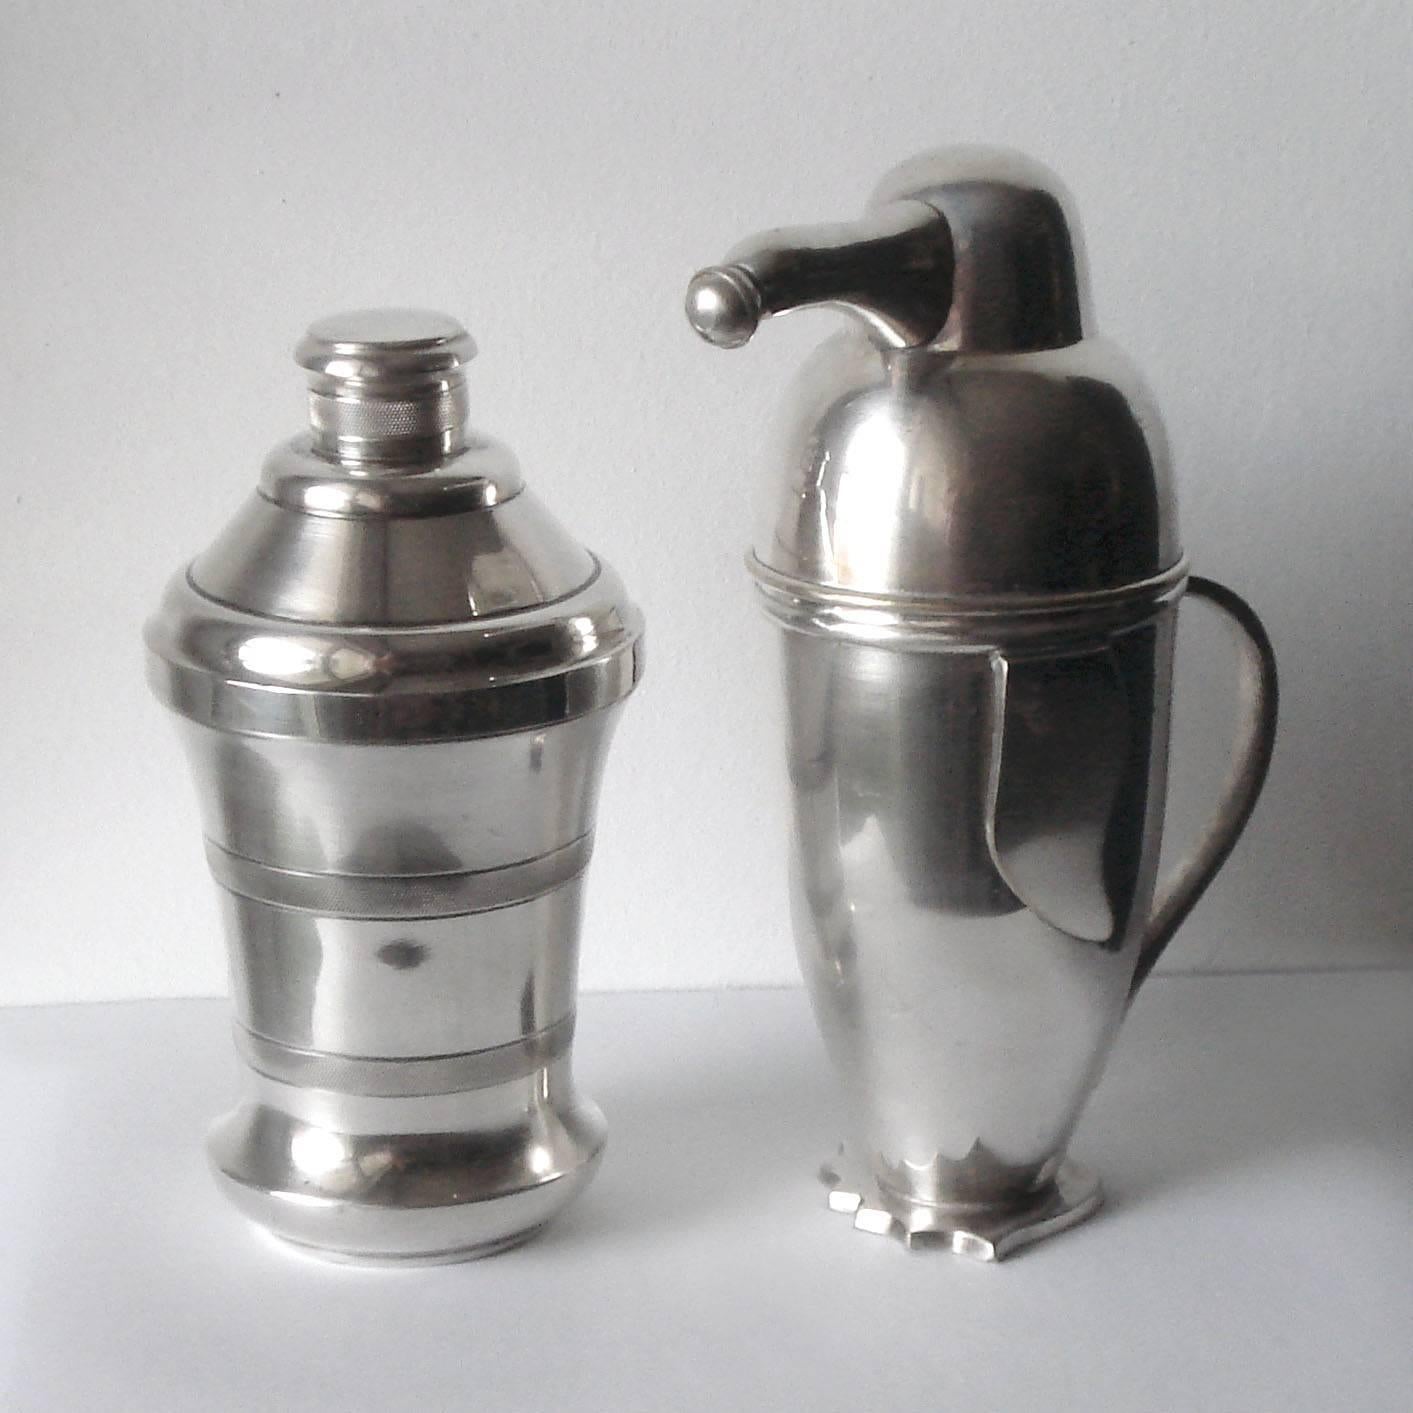 French streamline Machine Age cocktail shaker, silver plated metal.
Maker's mark under the bottom.
Very good overall condition.
Dimensions:
Height 20 cm (7.8 in), diameter 11 cm (4.33 in).